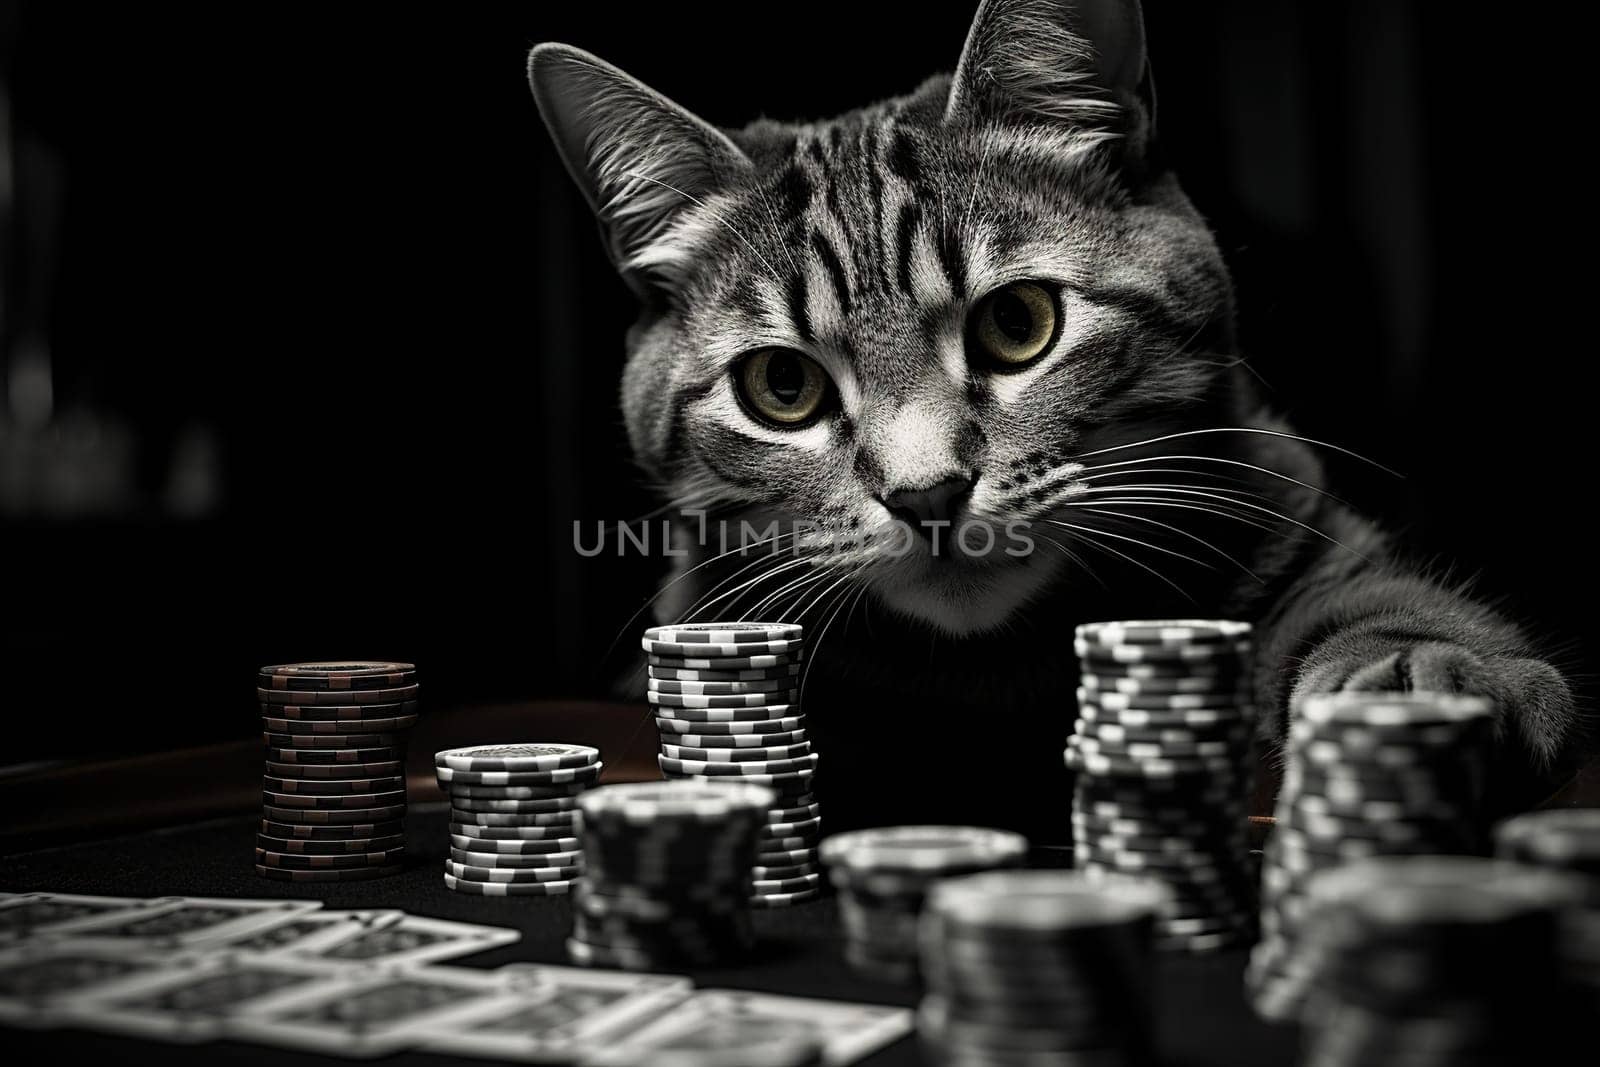 A cat at a poker table with stacks of chips in black and white. Gambling concept. Generated by artificial intelligence by Vovmar